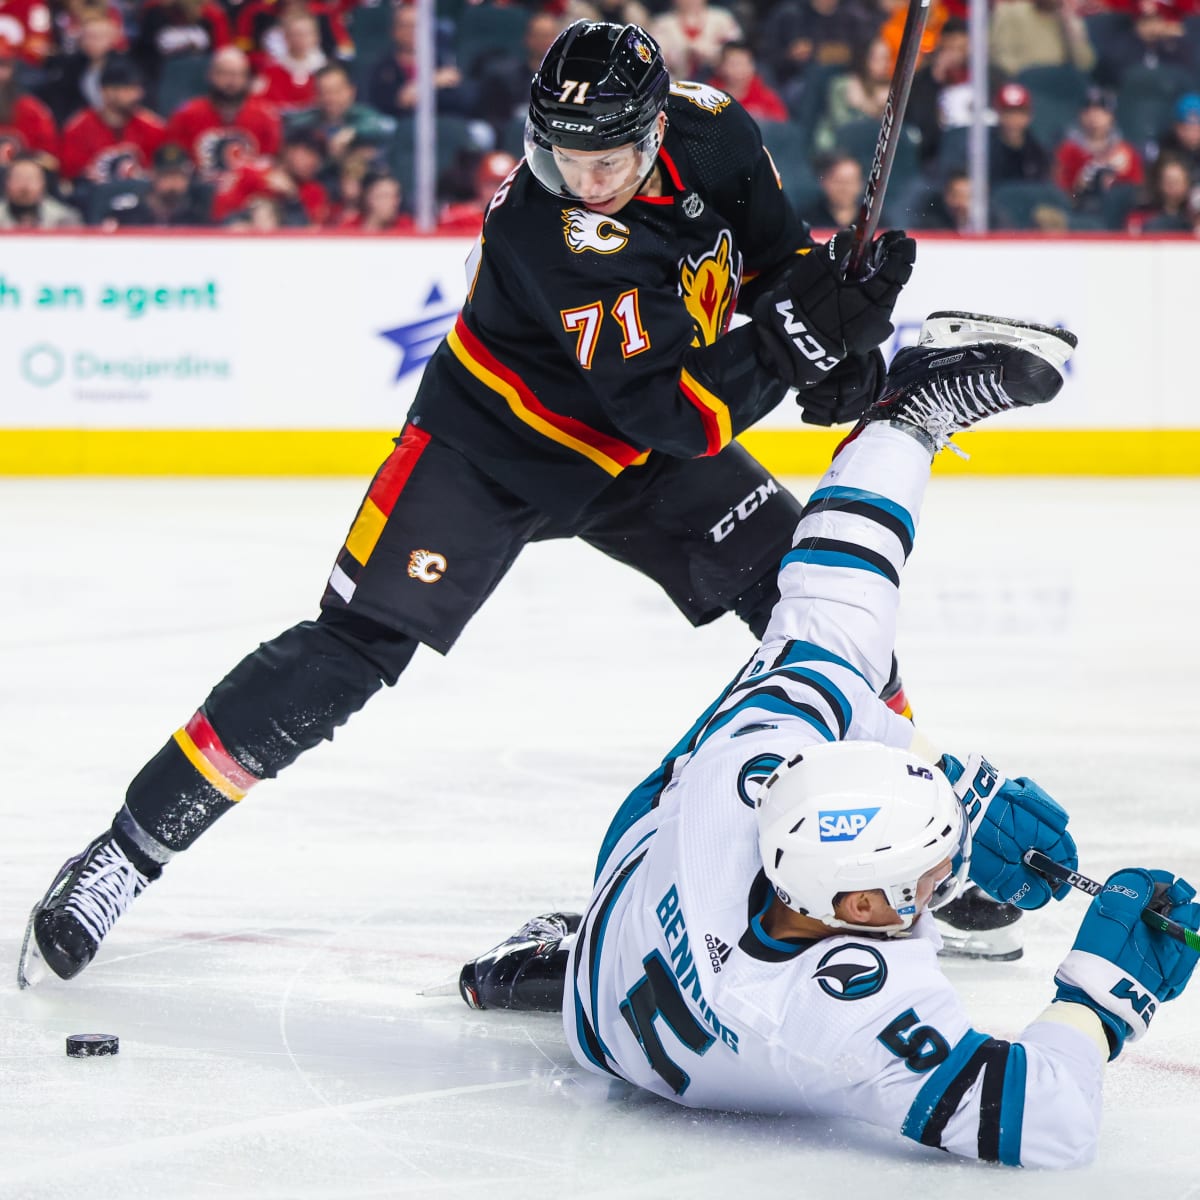 Toffoli's two-goal effort leads Flames in 5-3 win over Sharks